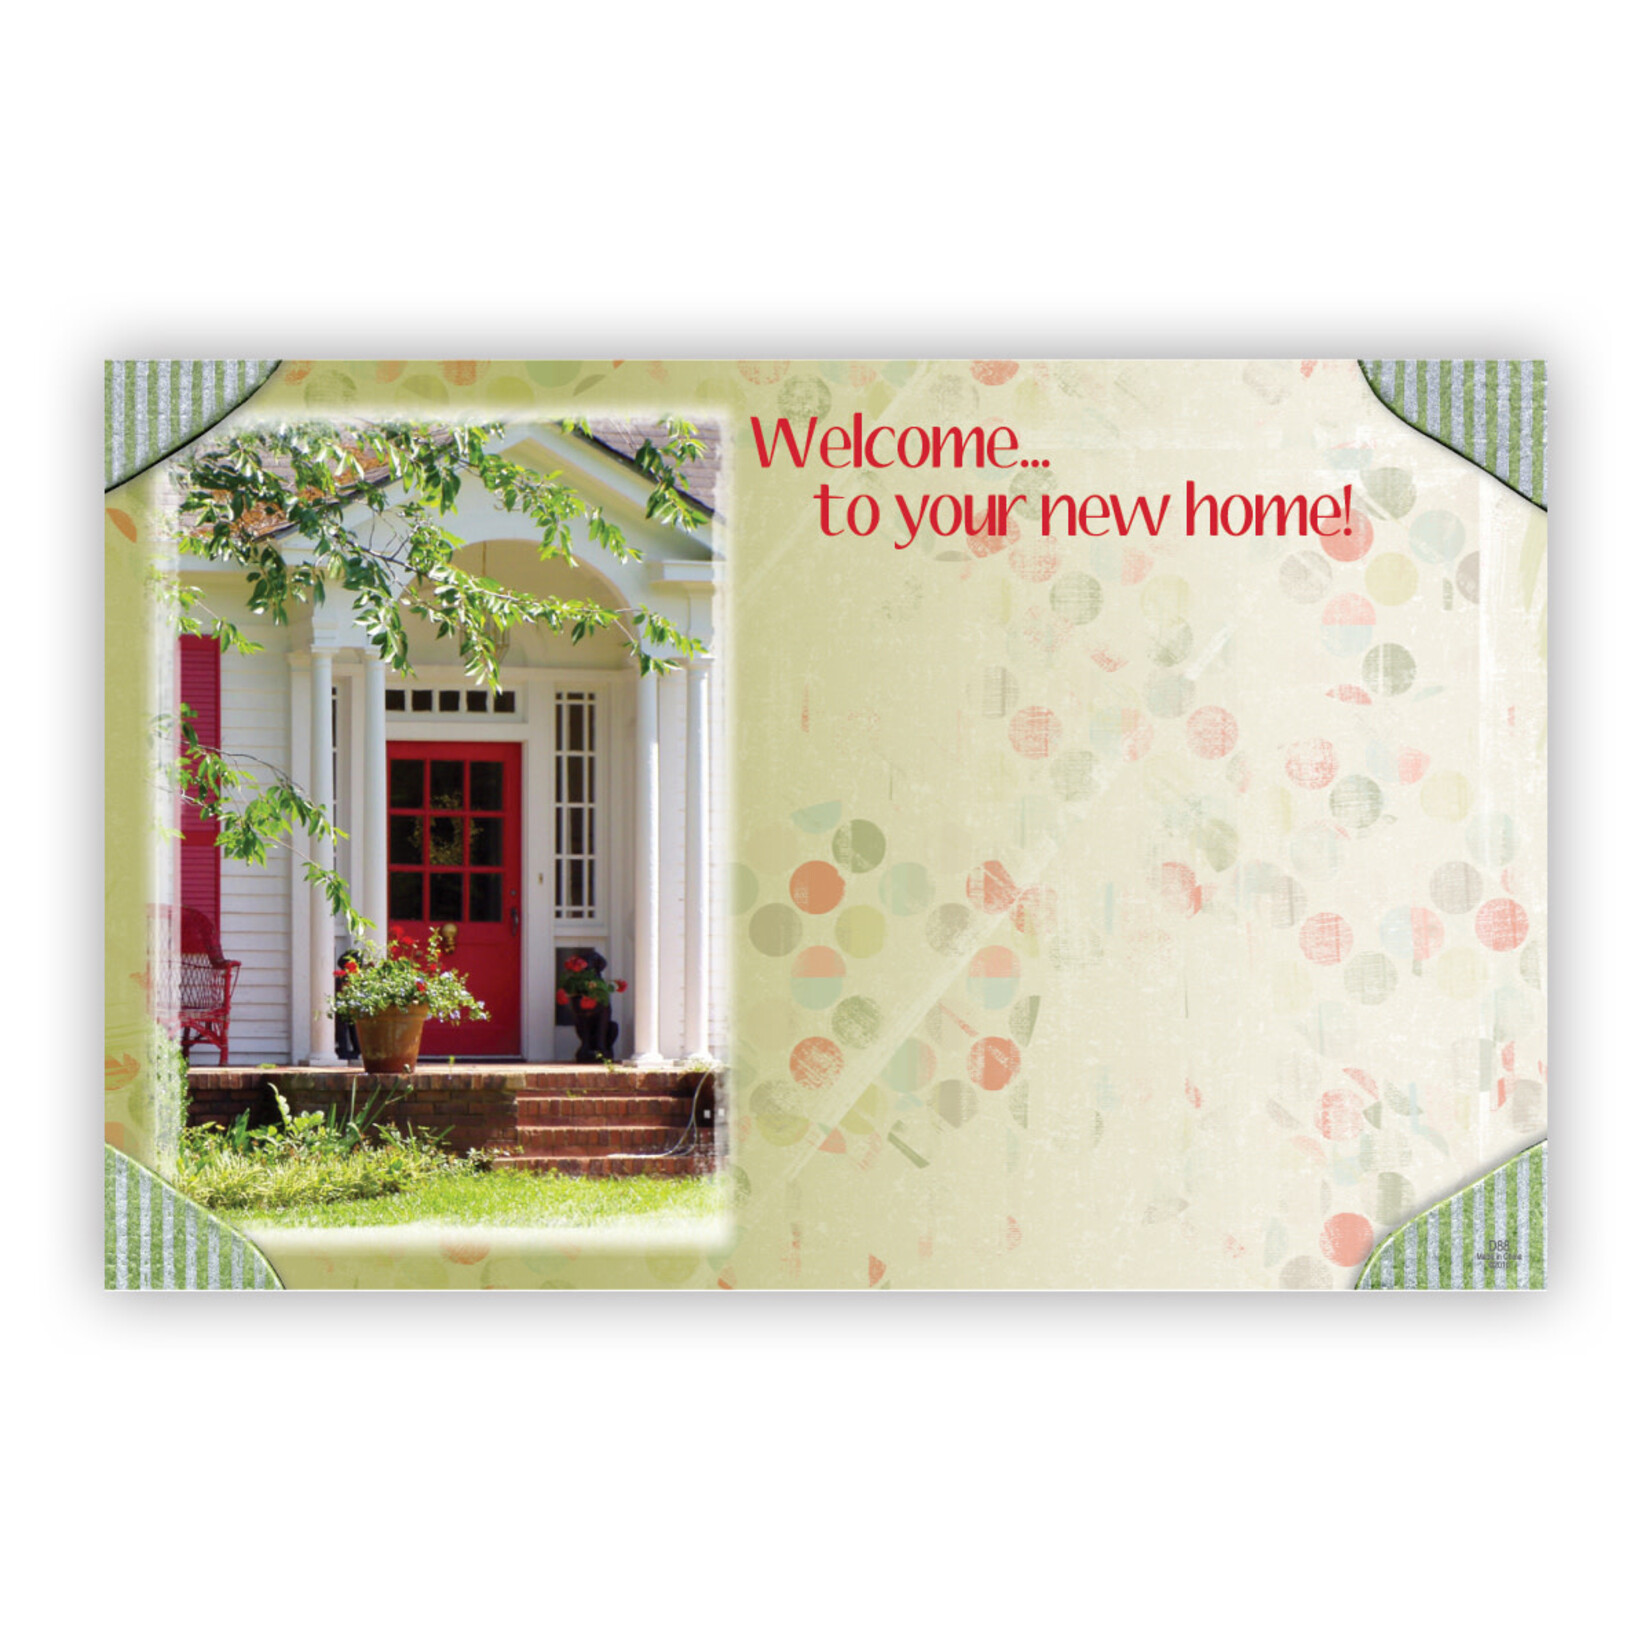 3.5" X 2.25" "WELCOME TO YOUR NEW HOME" CAPRI ENCLOSURE CARD